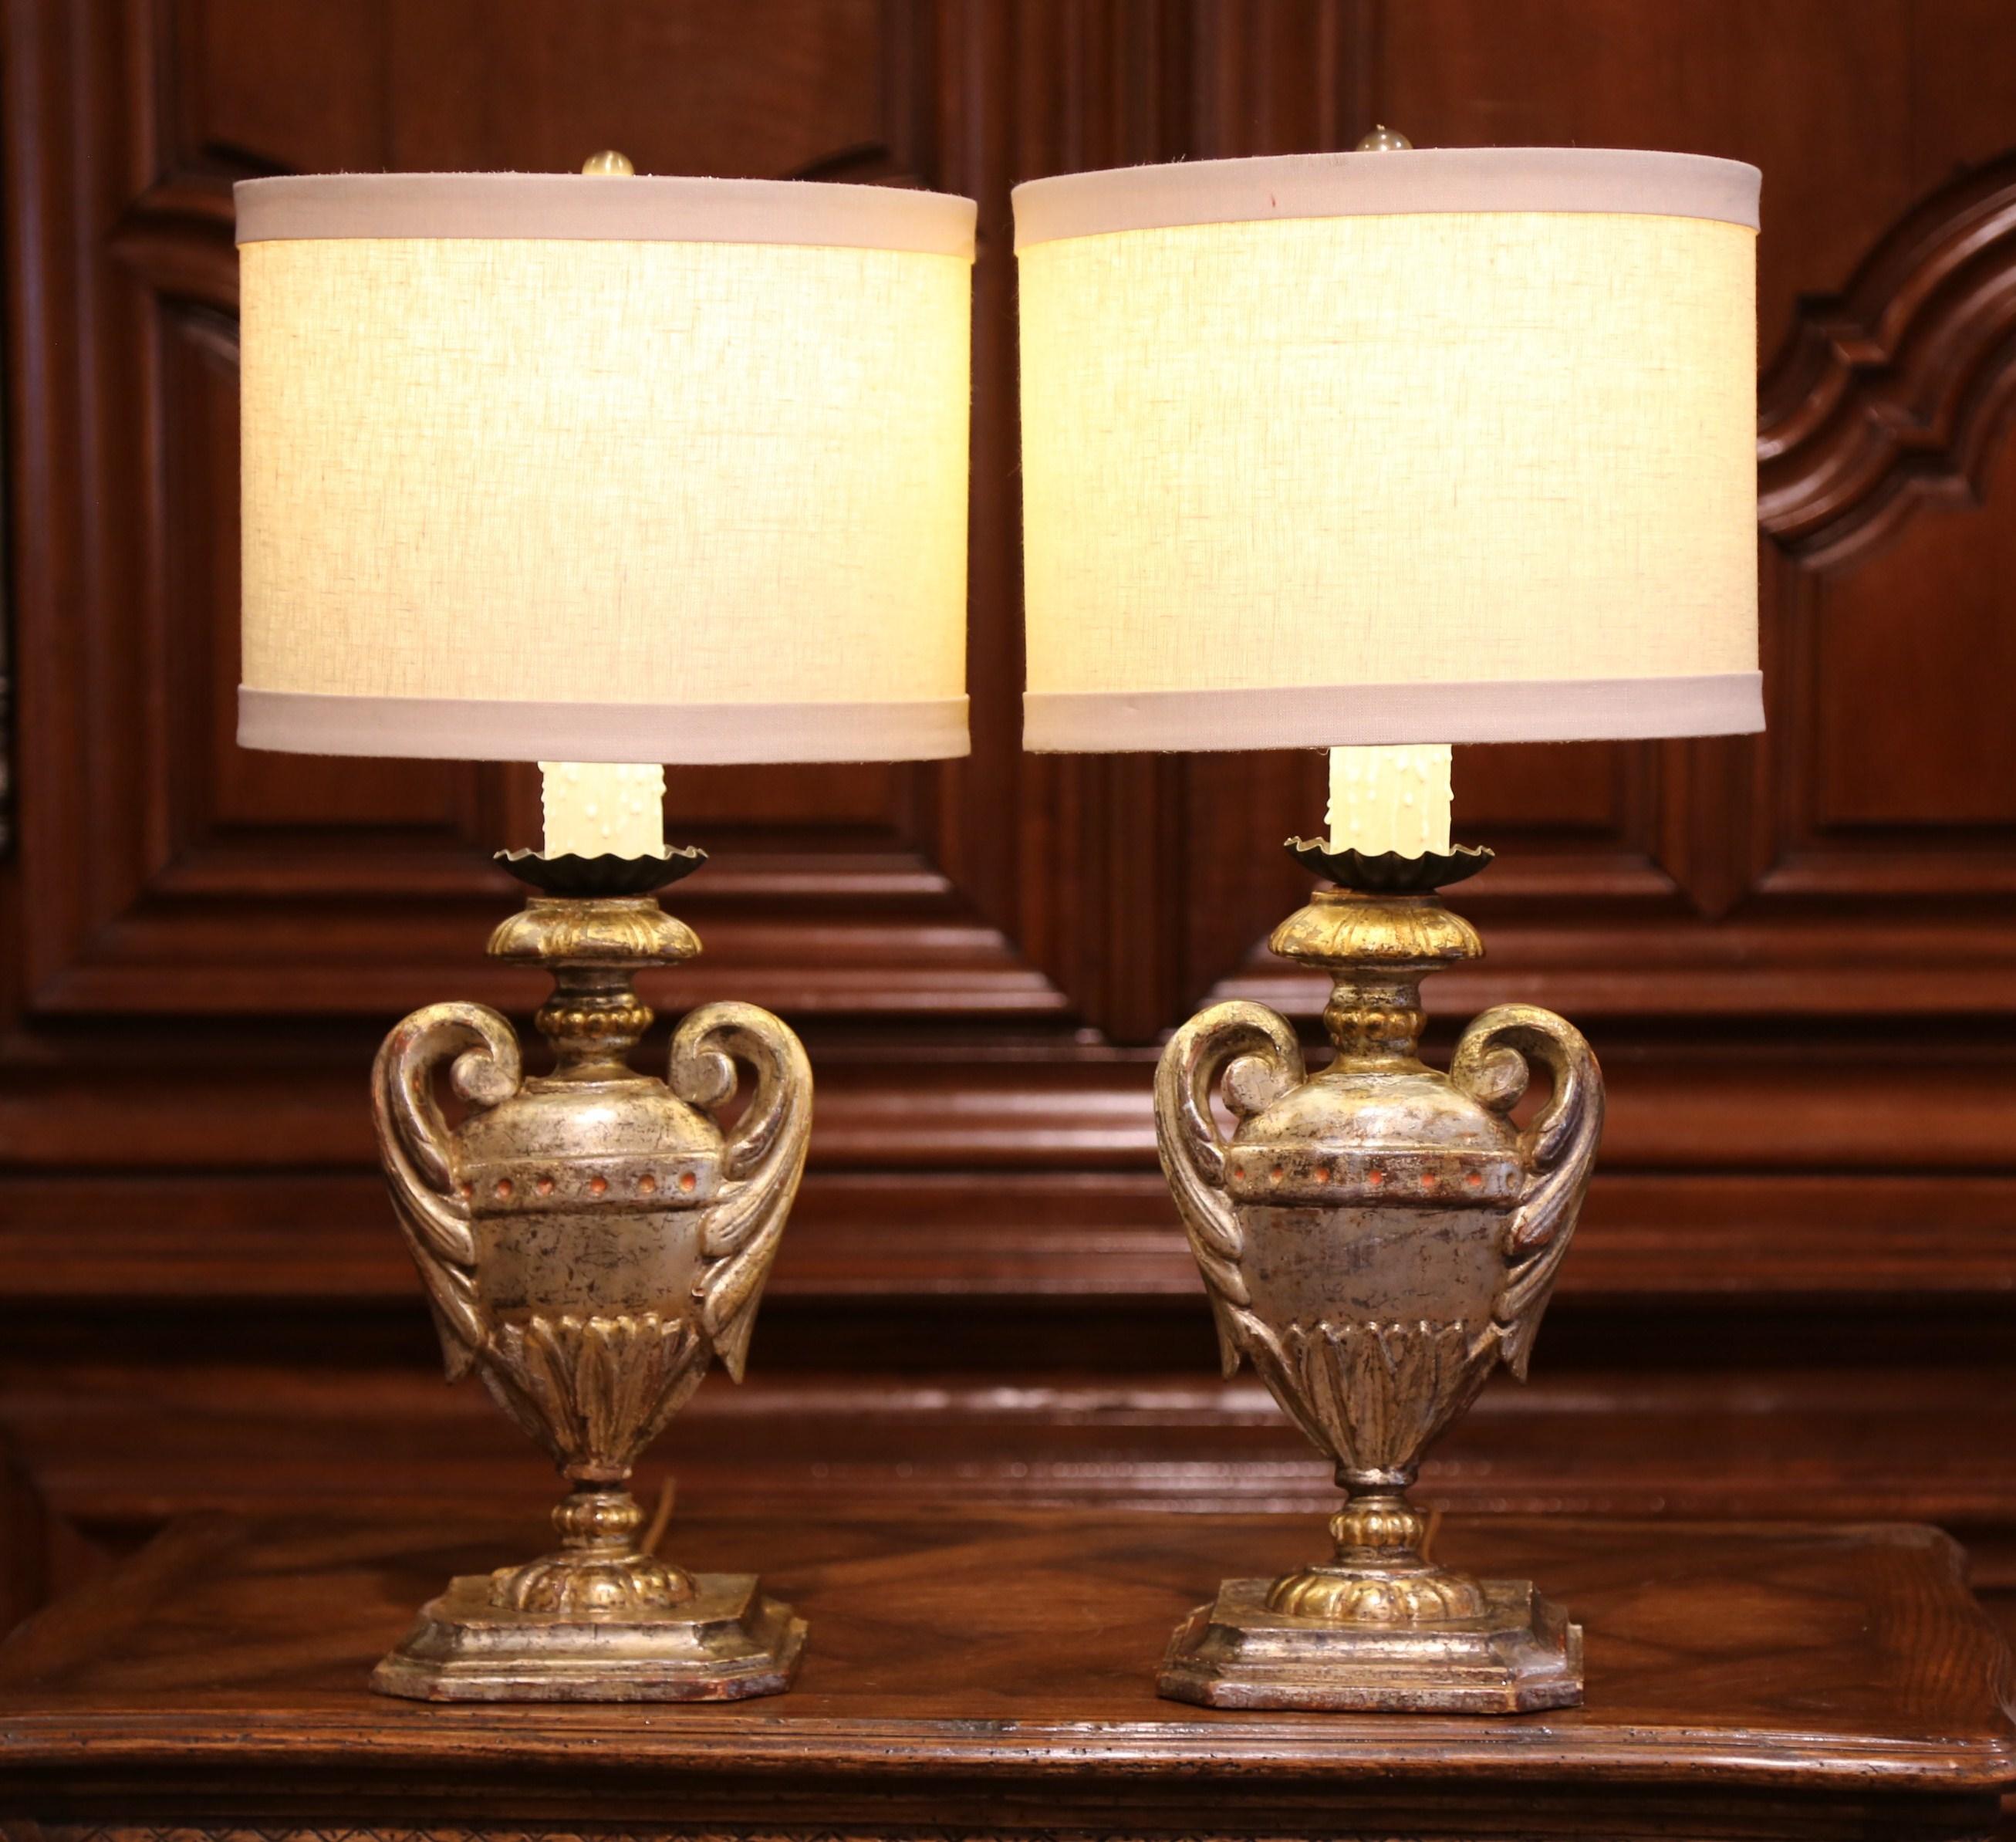 Pair of Early 20th Century Italian Carved Patinated Silver and Gilt Table Lamps 2